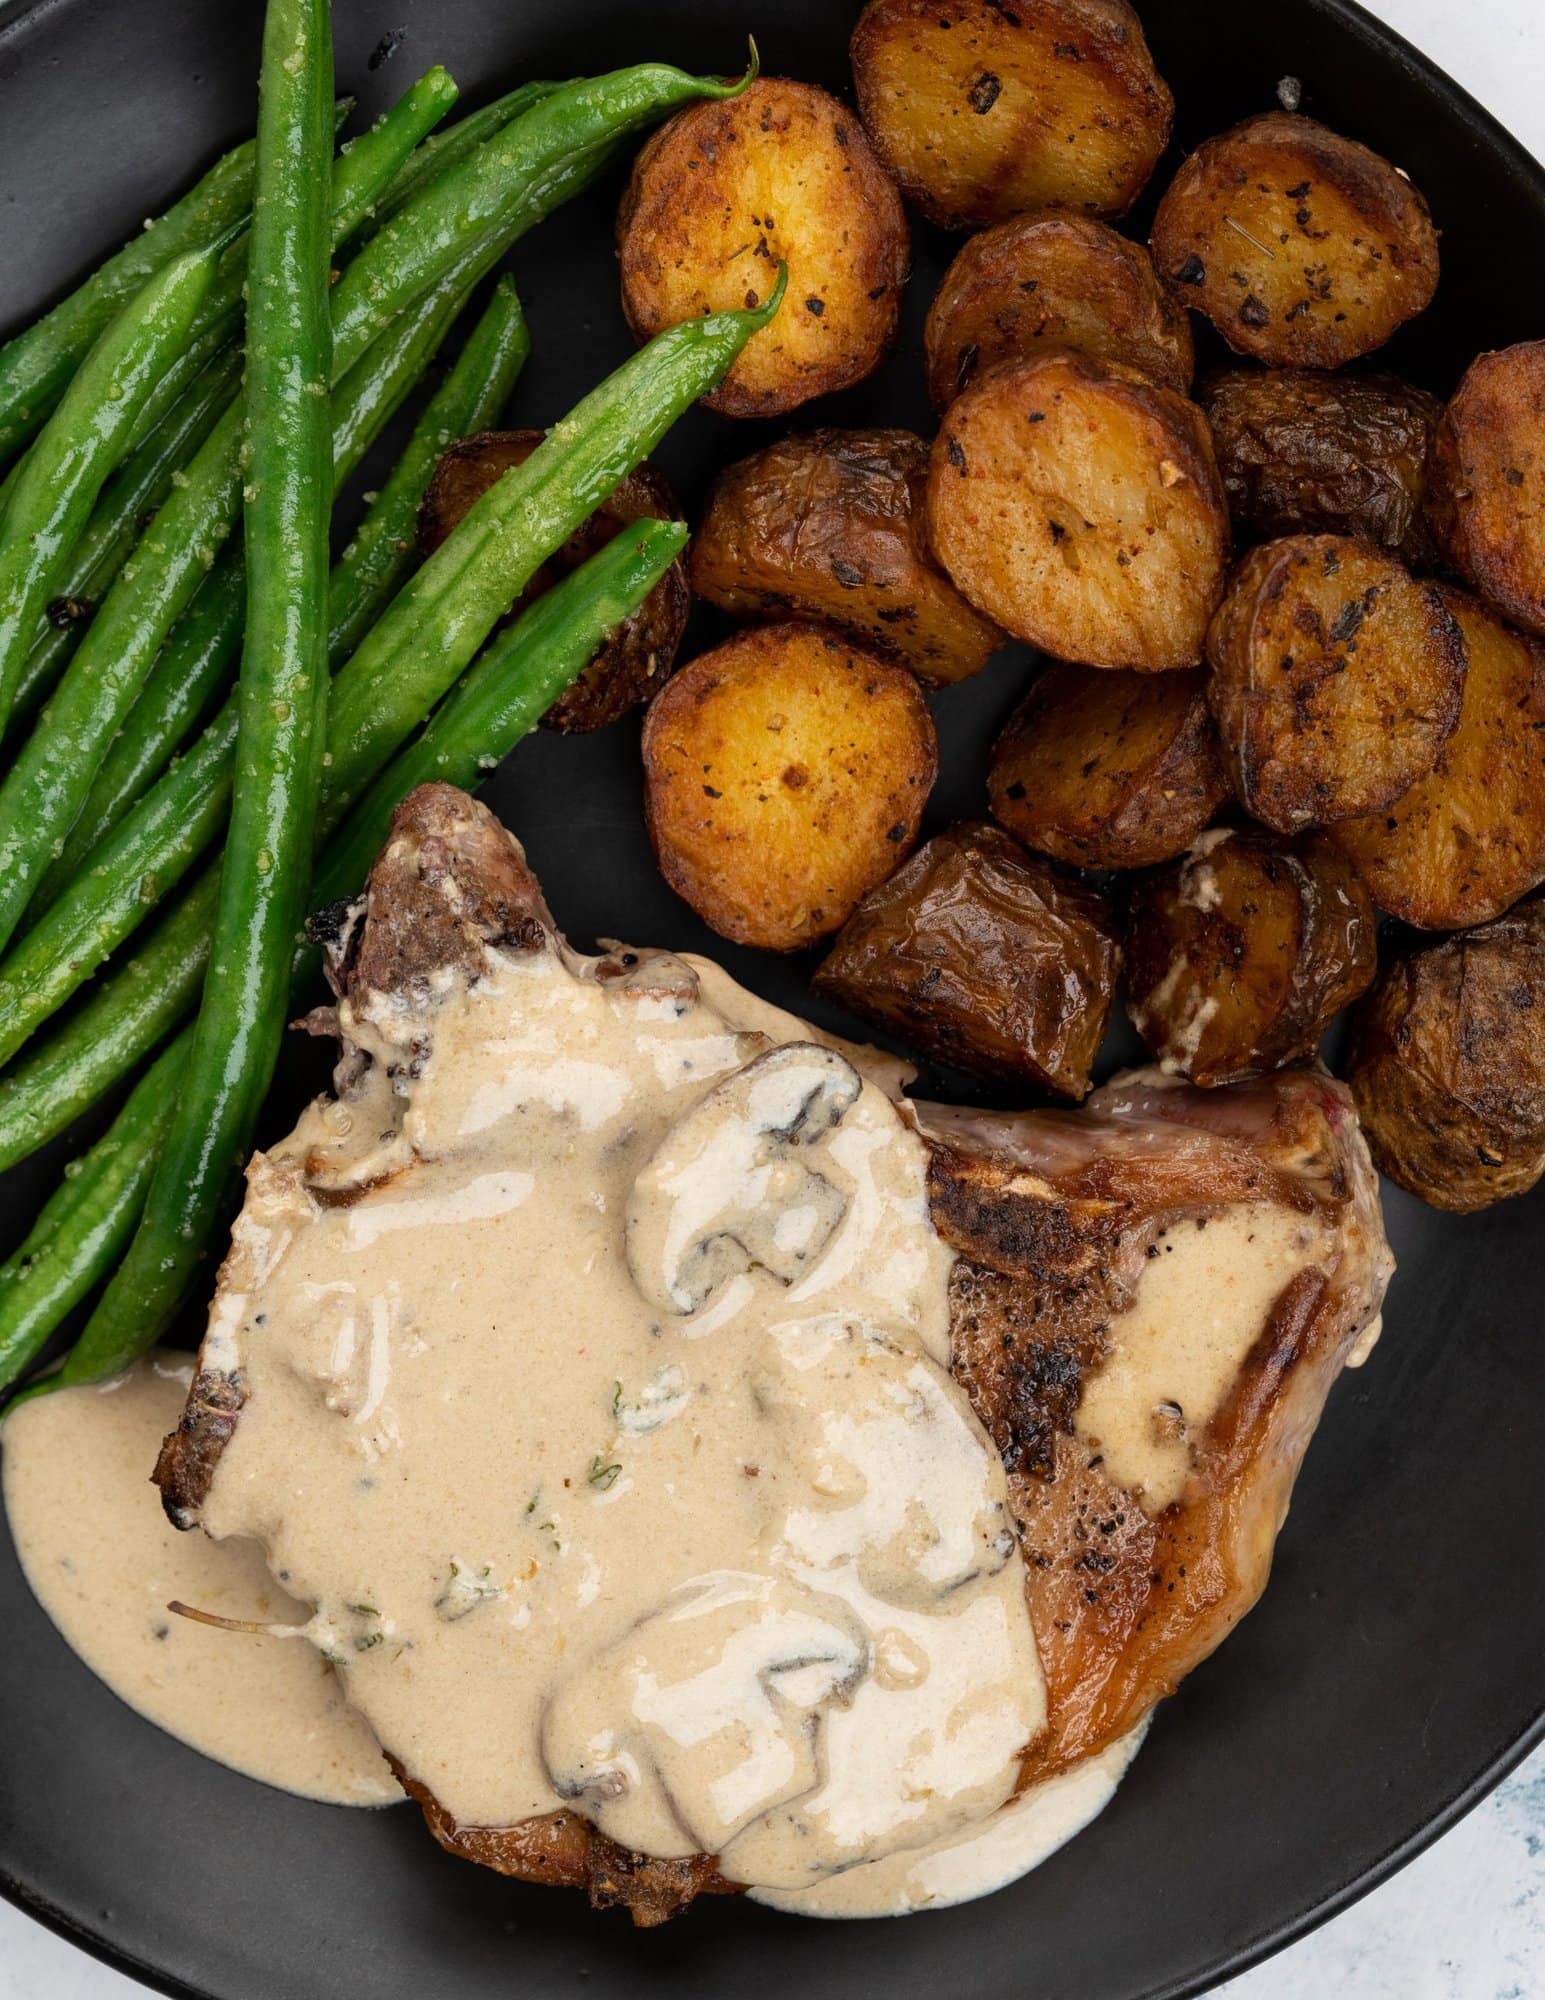 Creamy mushroom sauce drizzled over a pork chop with brown crust and served on a black plate with roasted potatoes and sauteed green beans.